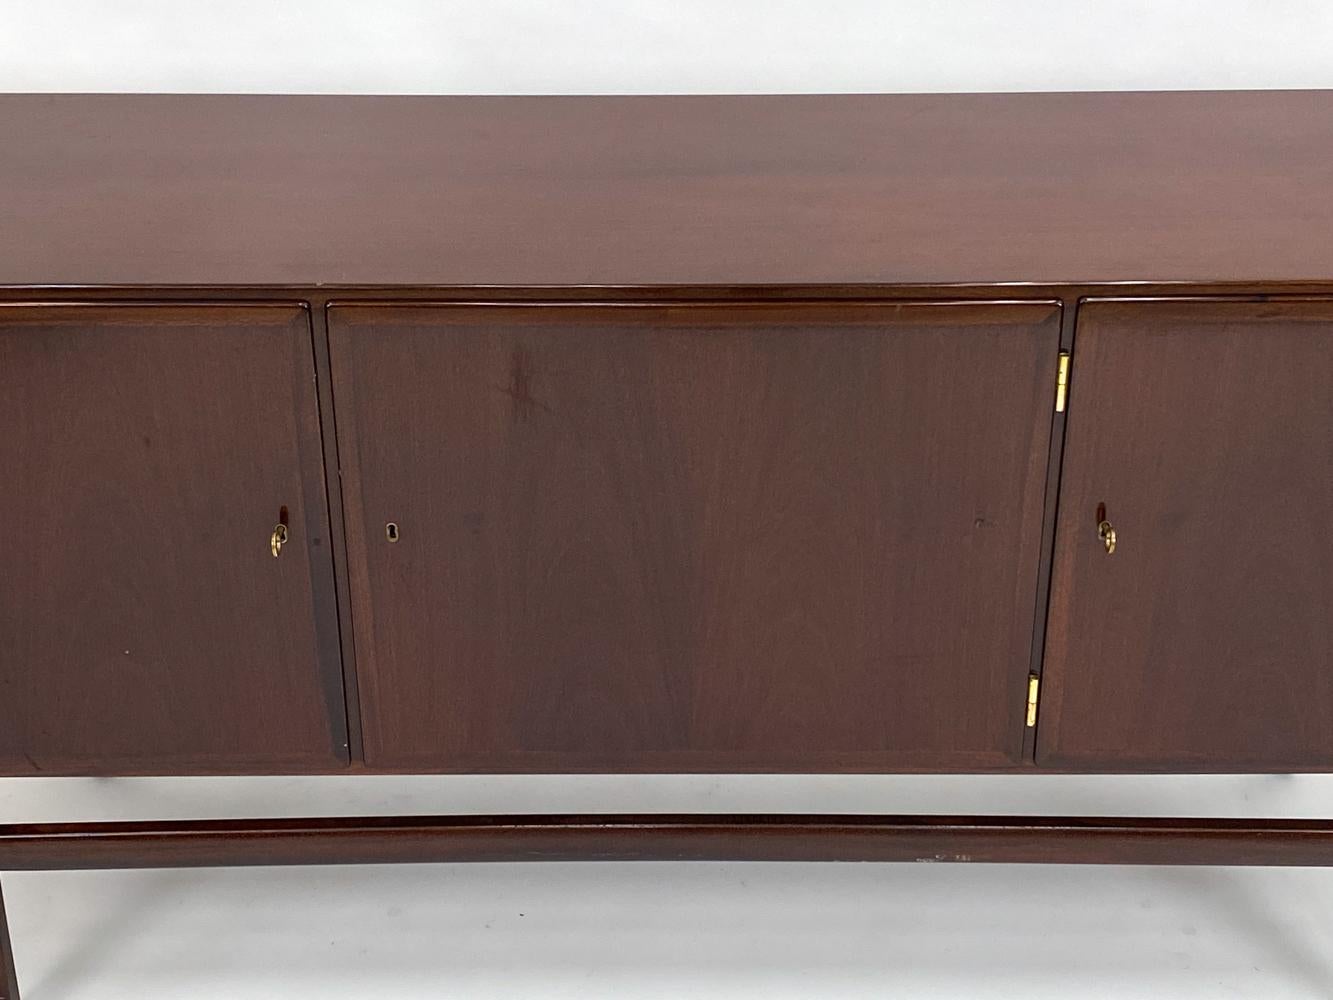 Ole Wanscher for Poul Jeppesen Rungstedlund Series Sideboard in Mahogany In Good Condition For Sale In Norwalk, CT